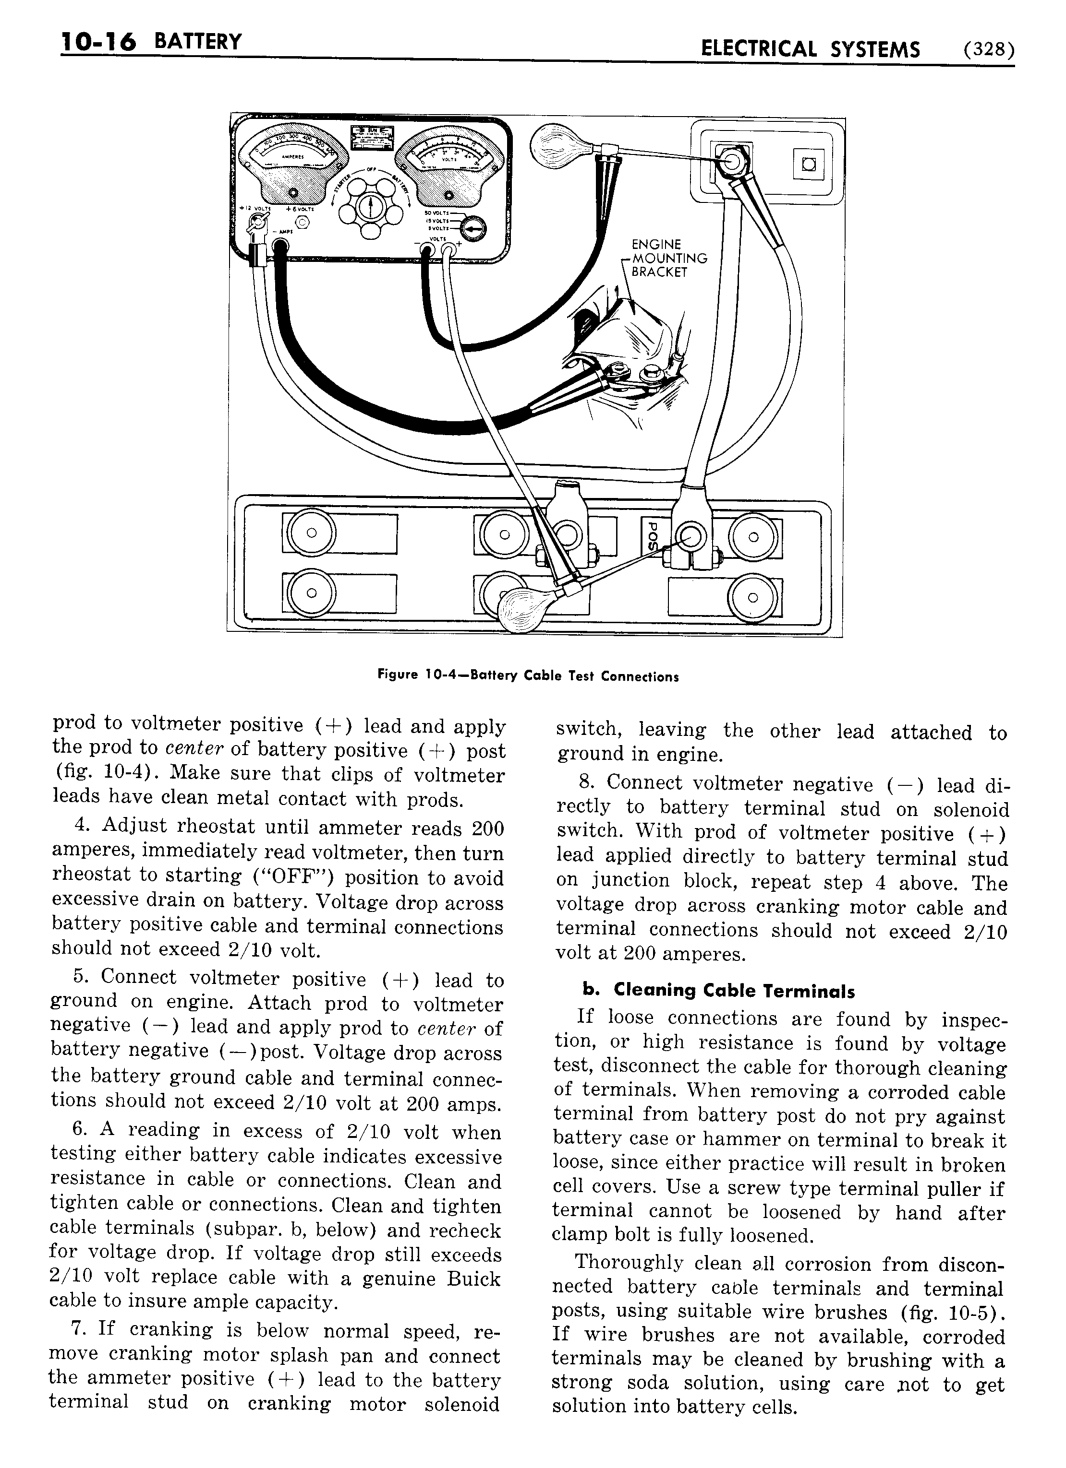 n_11 1954 Buick Shop Manual - Electrical Systems-016-016.jpg